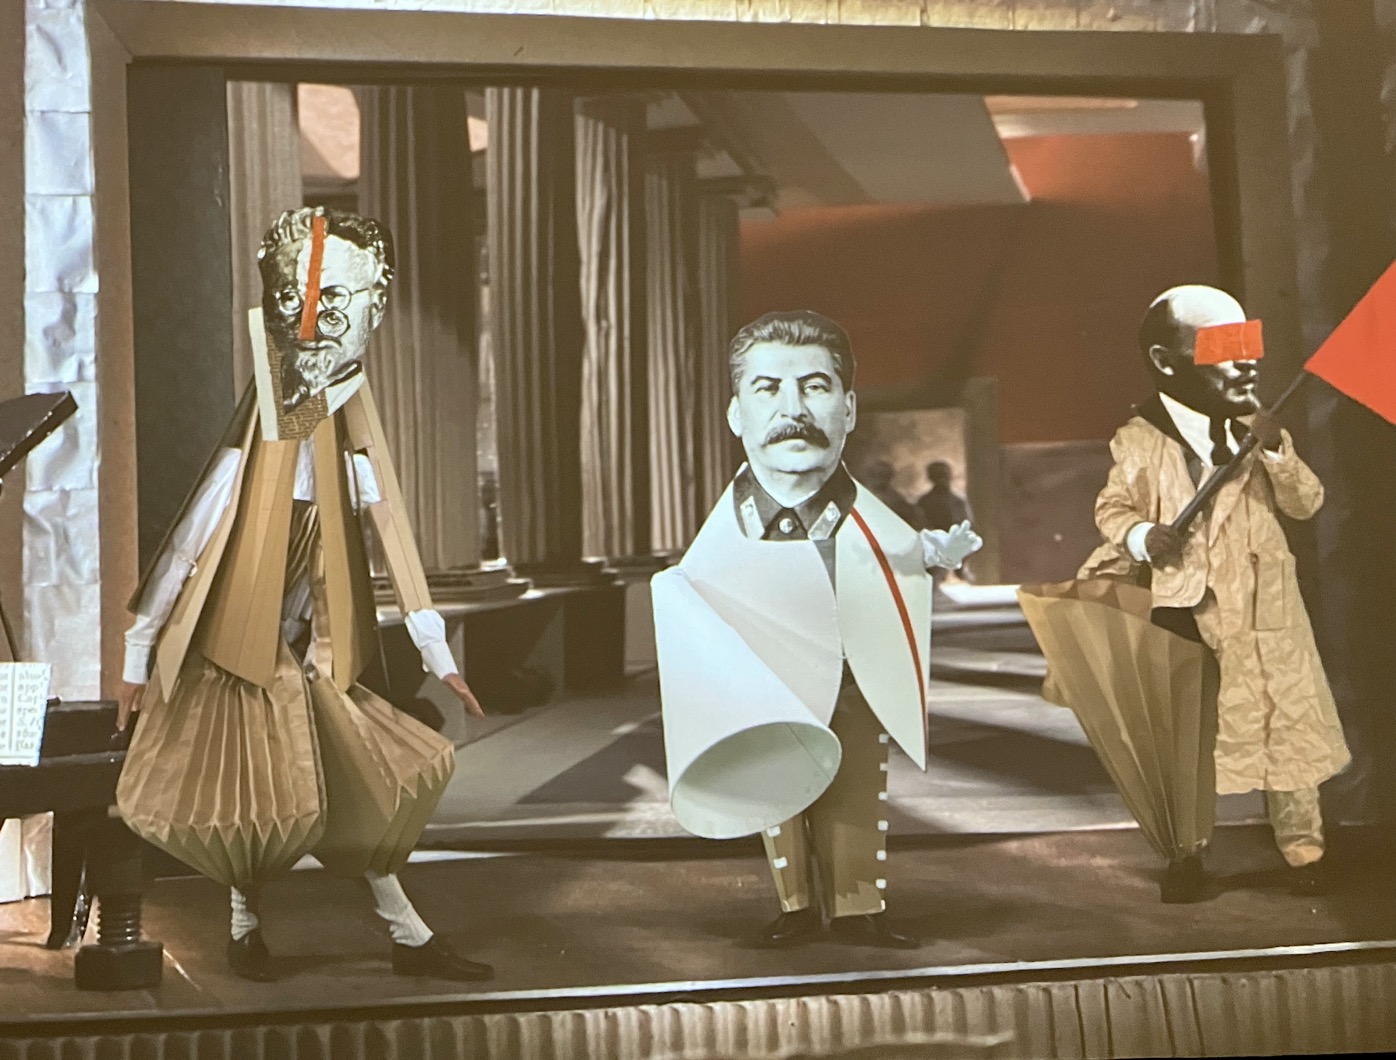 Film still from Oh to Believe in Another World by William Kentridge featuring Trotsky, Lenin and Stalin